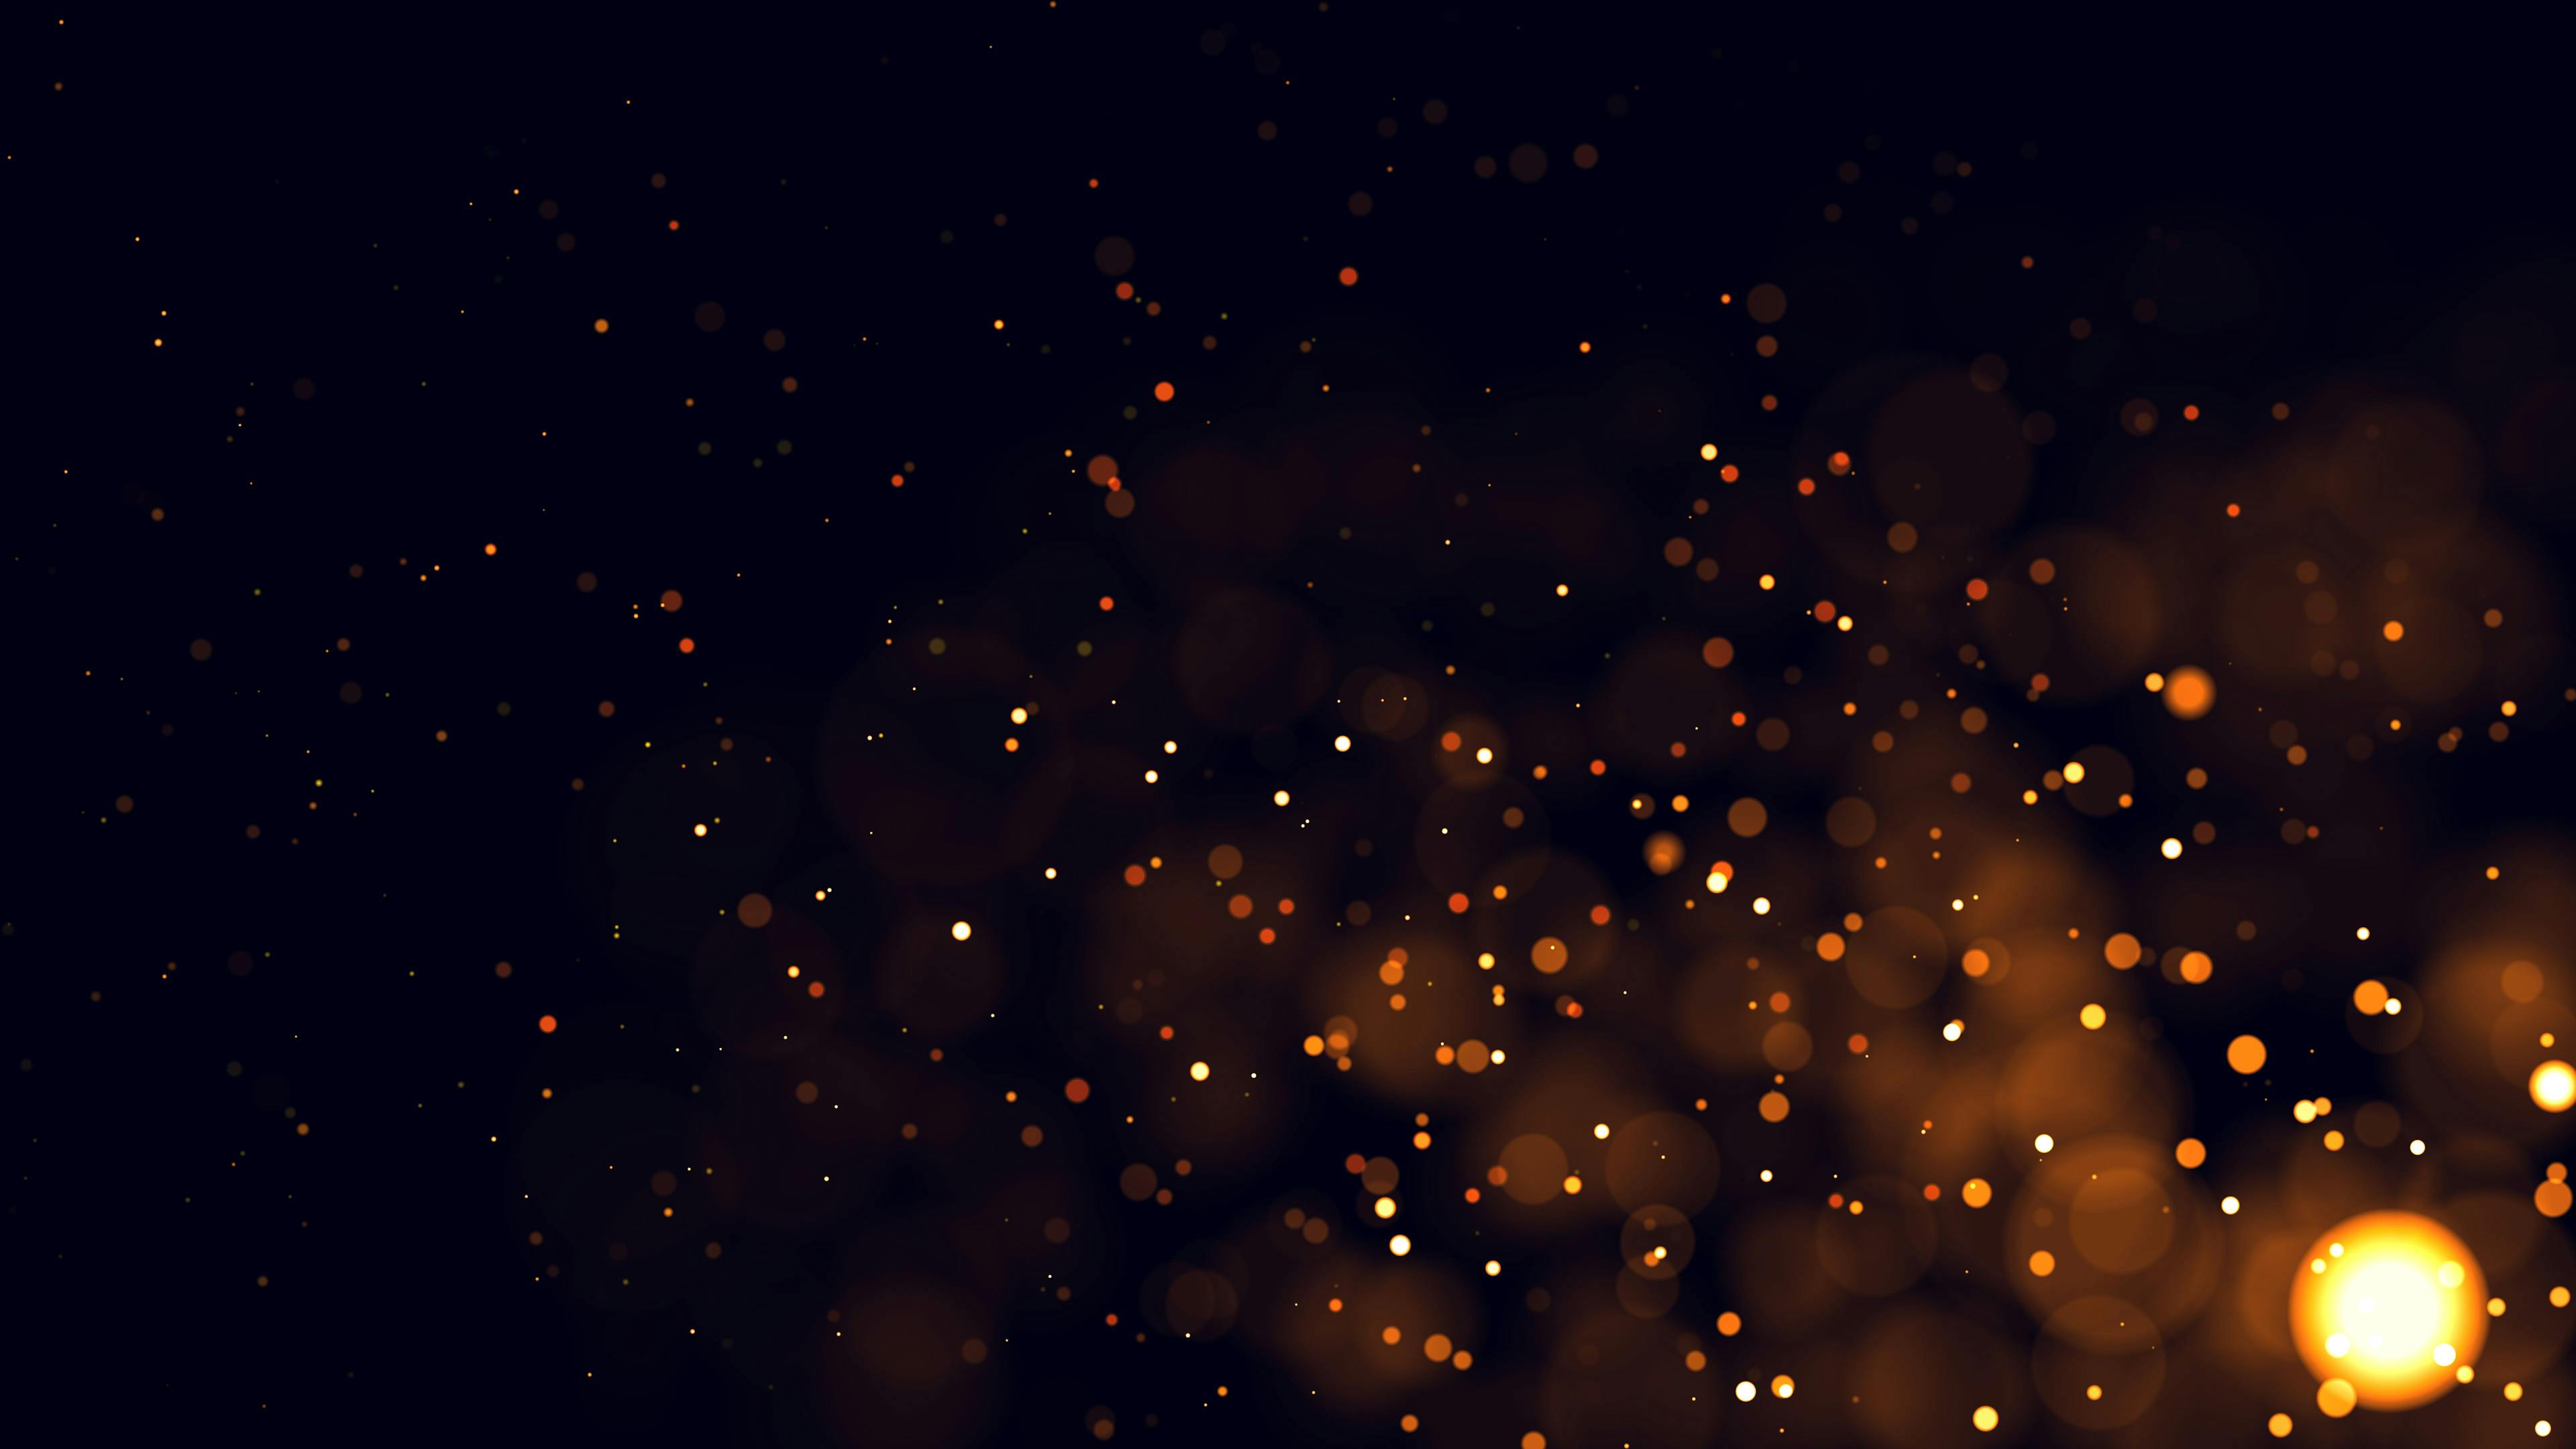 Gold abstract bokeh background. real backlit dust particles with real lens flare. | Image Credit: © MrsChonthicha - stock.adobe.com